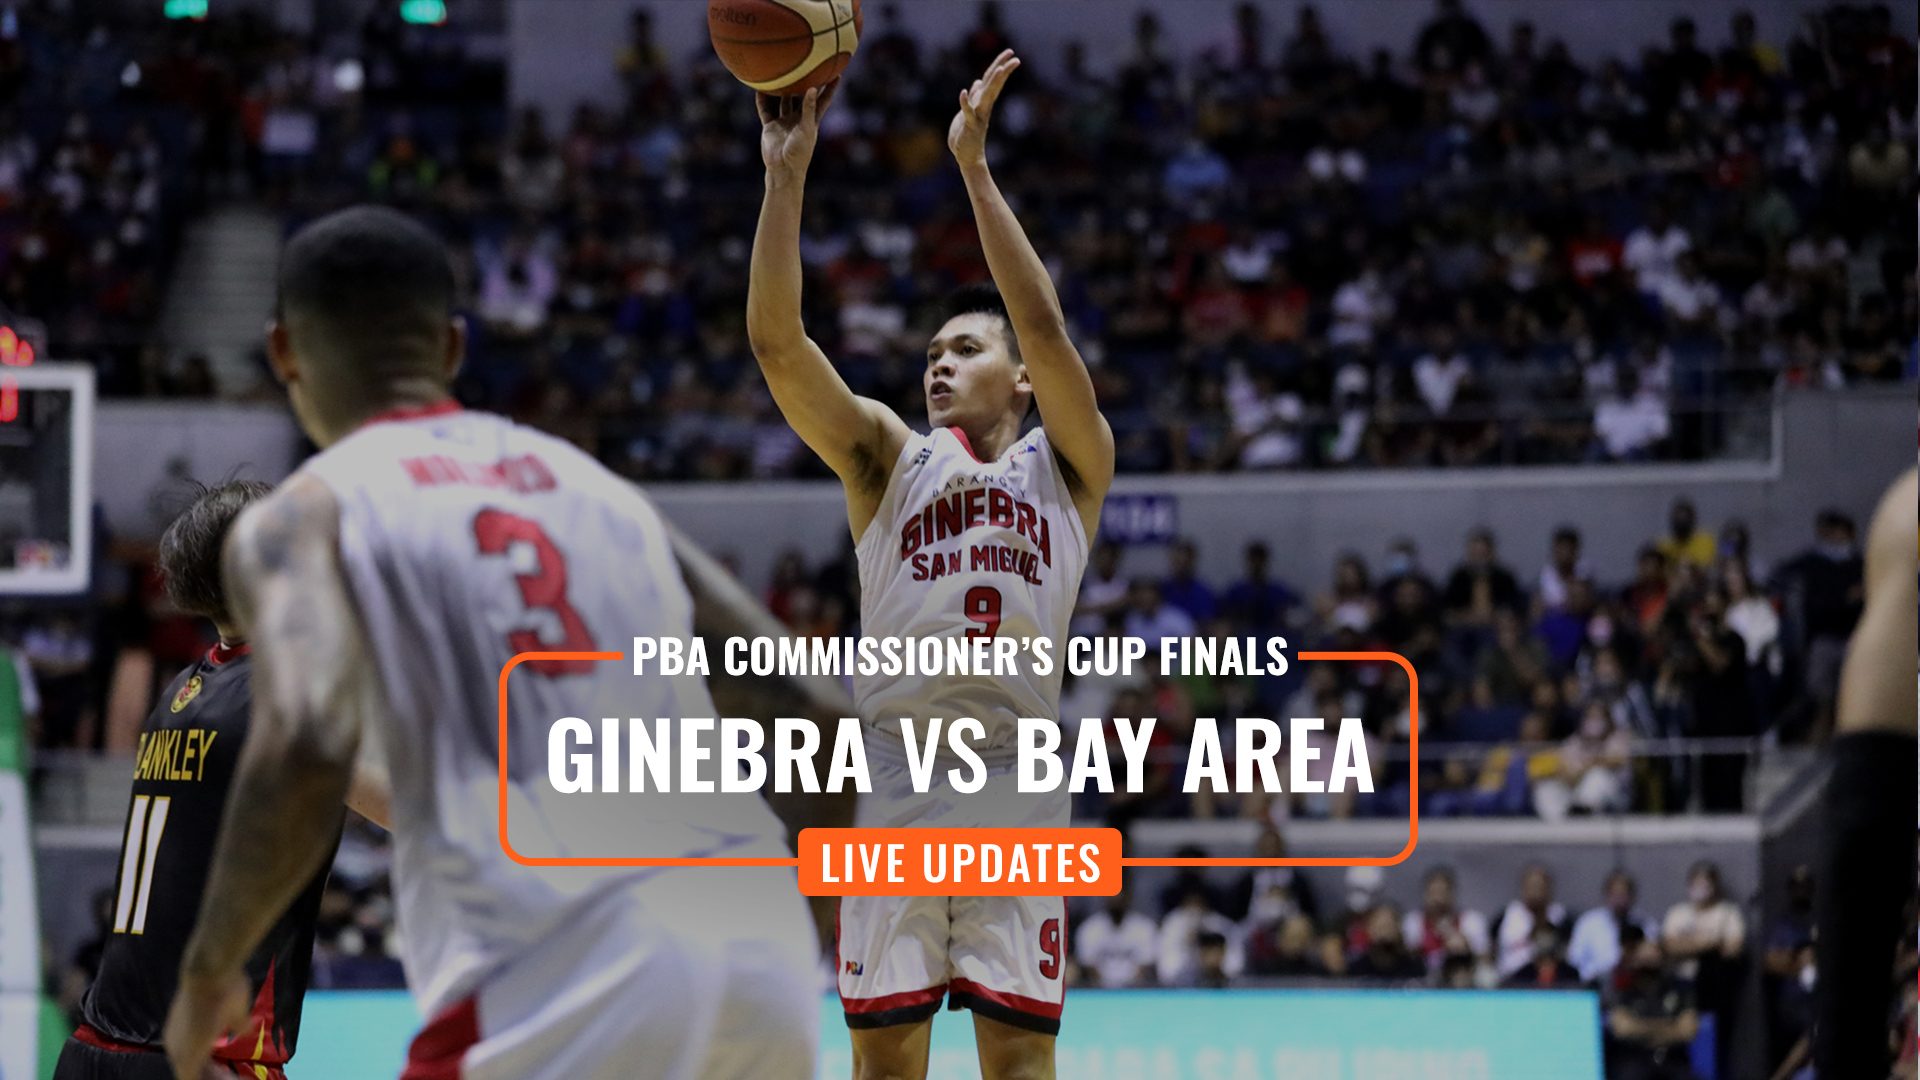 HIGHLIGHTS: Ginebra vs Bay Area, Game 5 – PBA Commissioner’s Cup finals 2022-2023